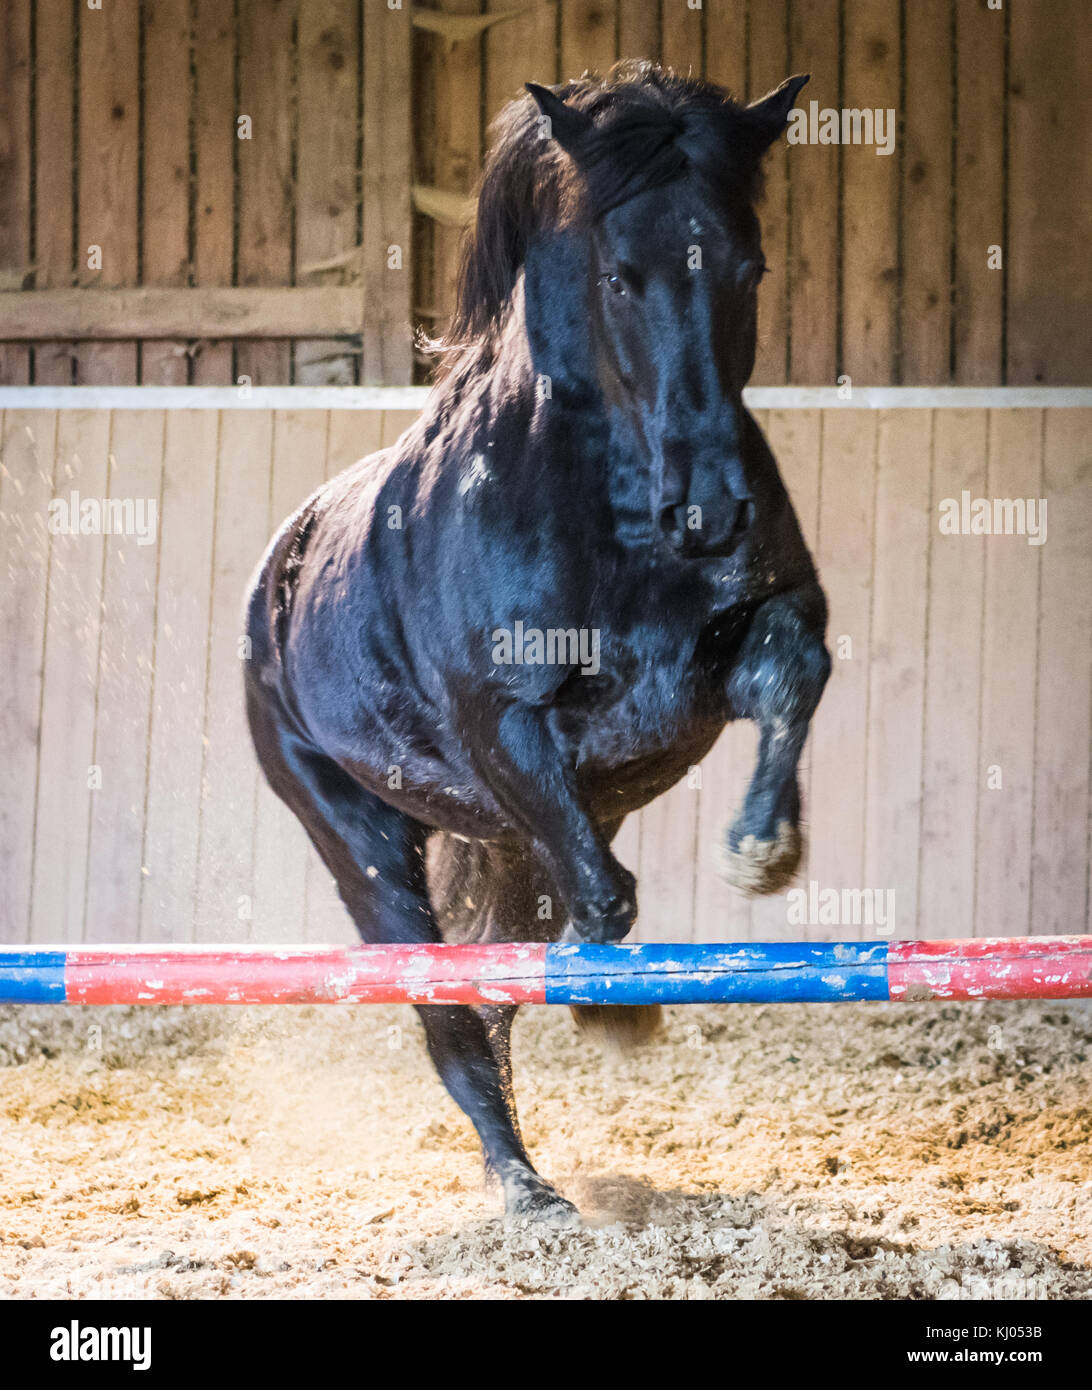 black arabian horse jumping in the arena Stock Photo